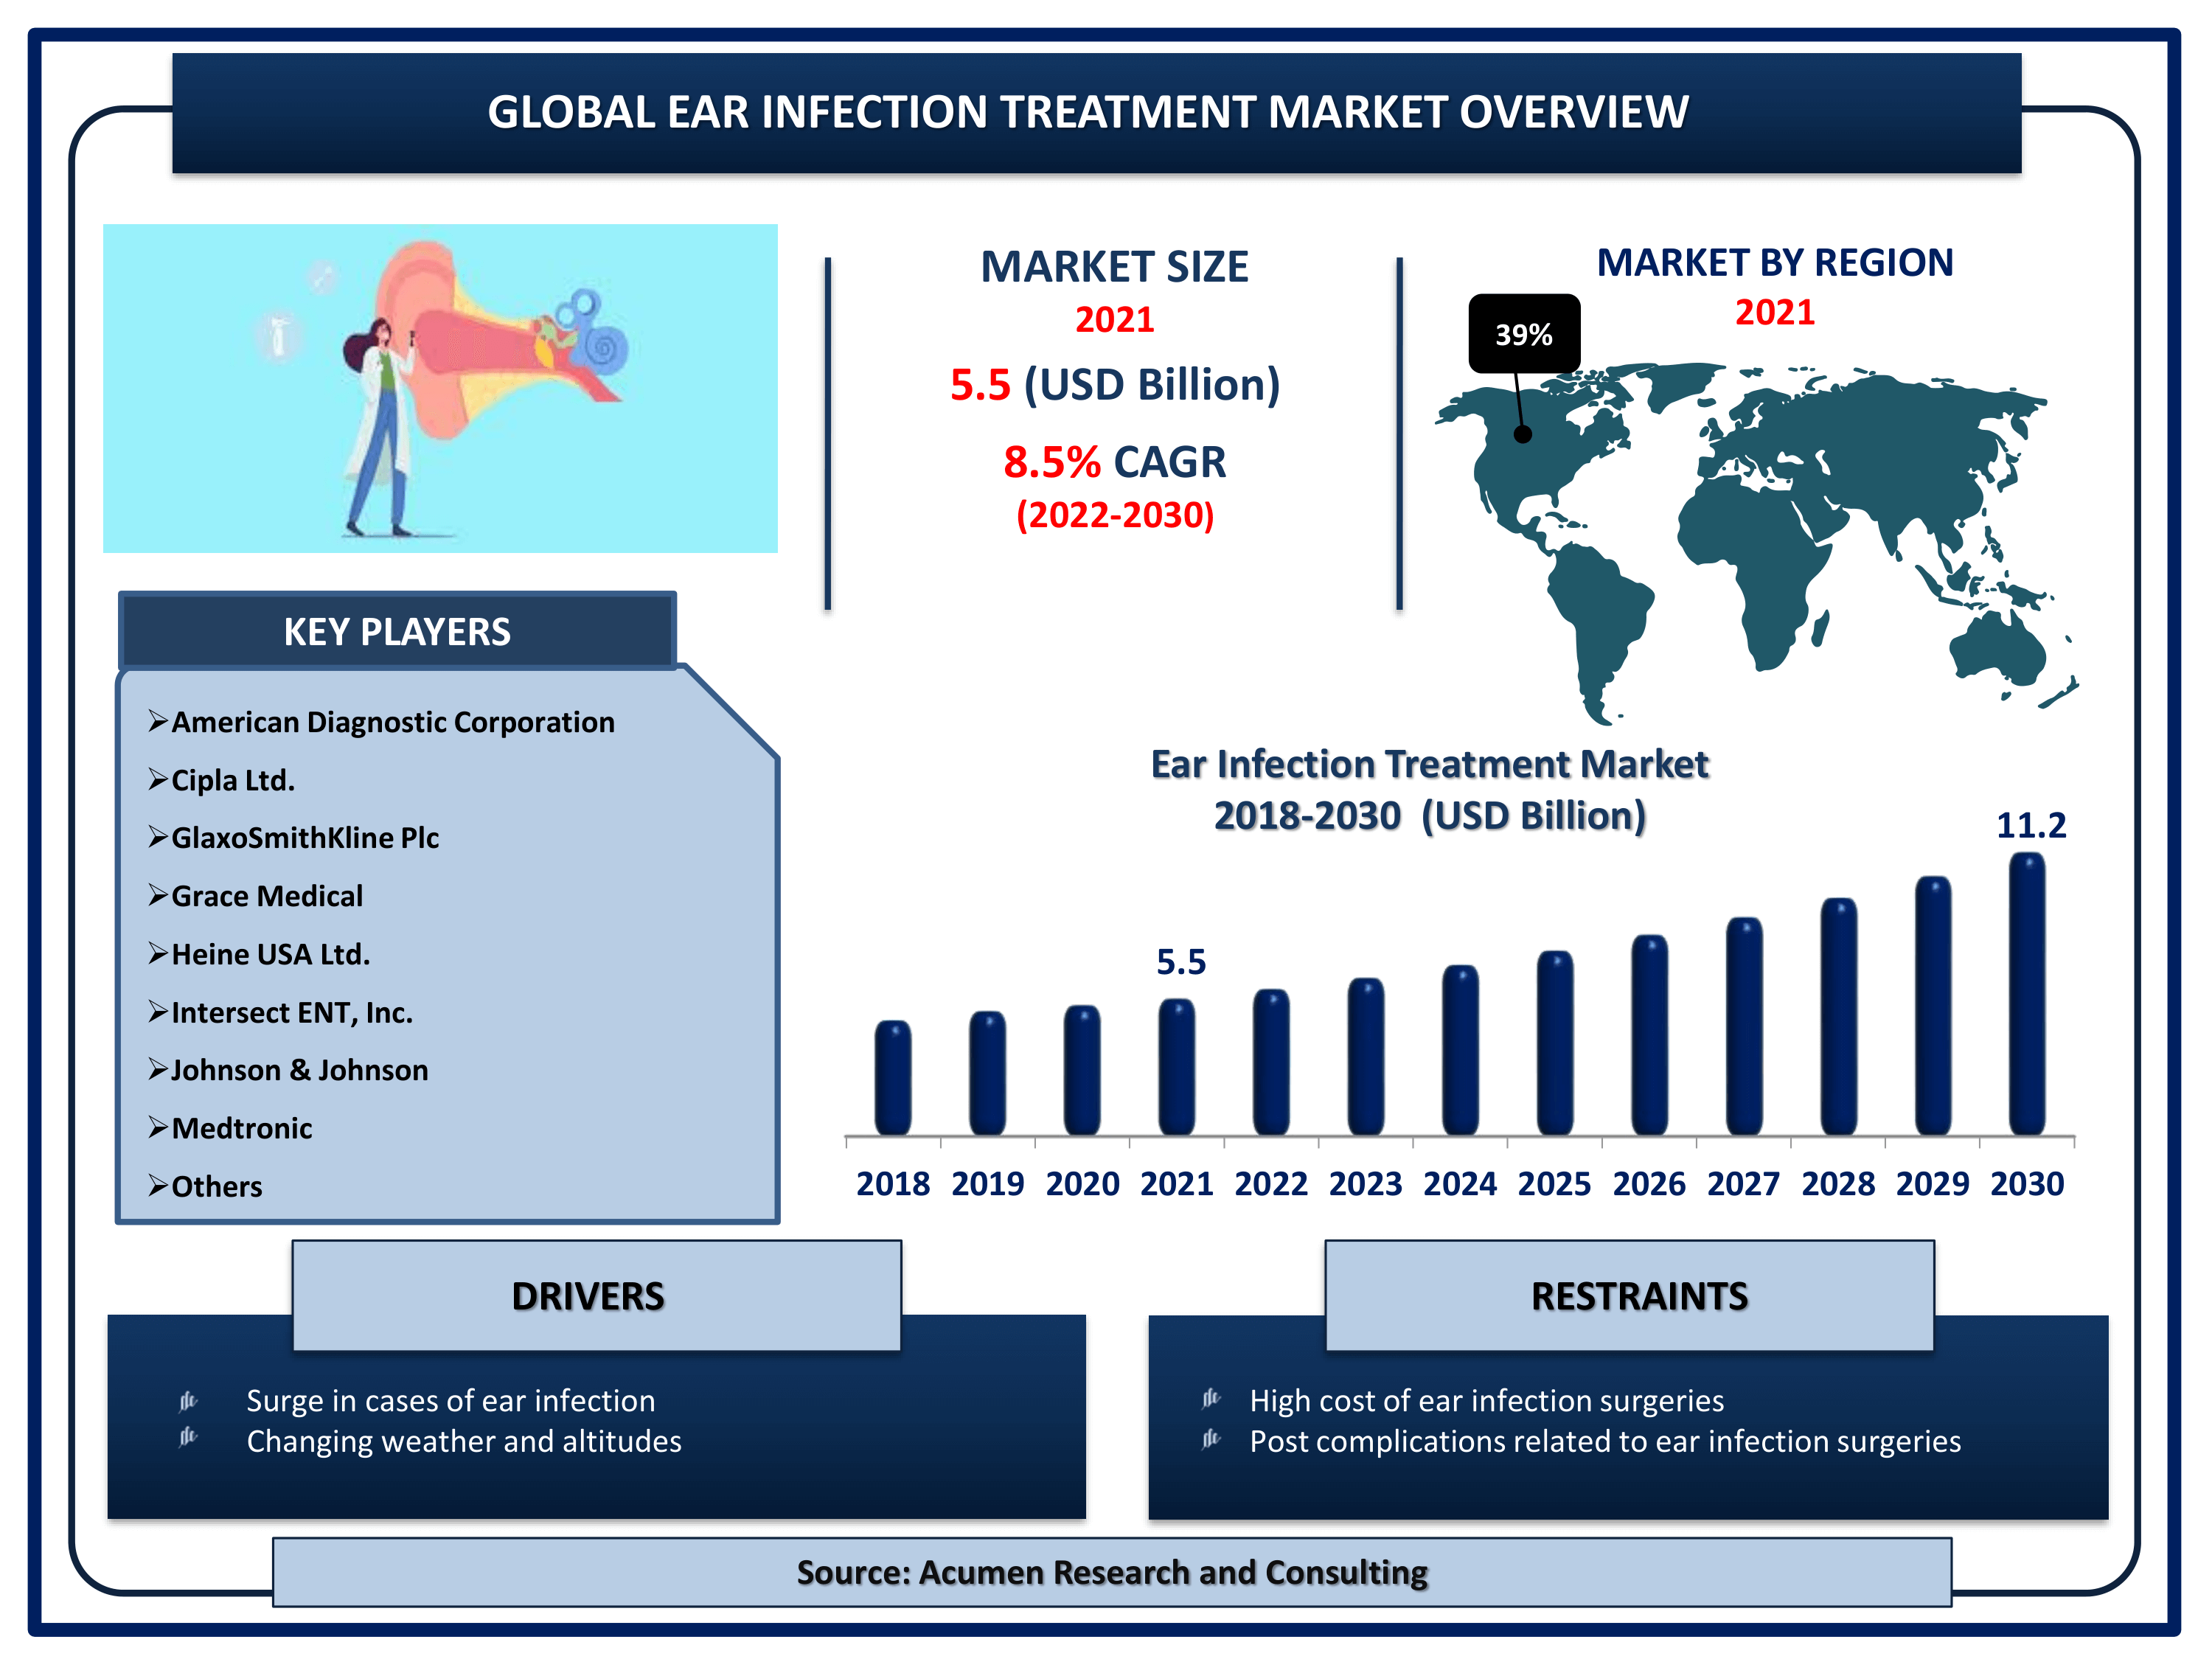 Global ear infection treatment market revenue is estimated to reach USD 11.2 Billion by 2030 with a CAGR of 8.5% from 2022 to 2030